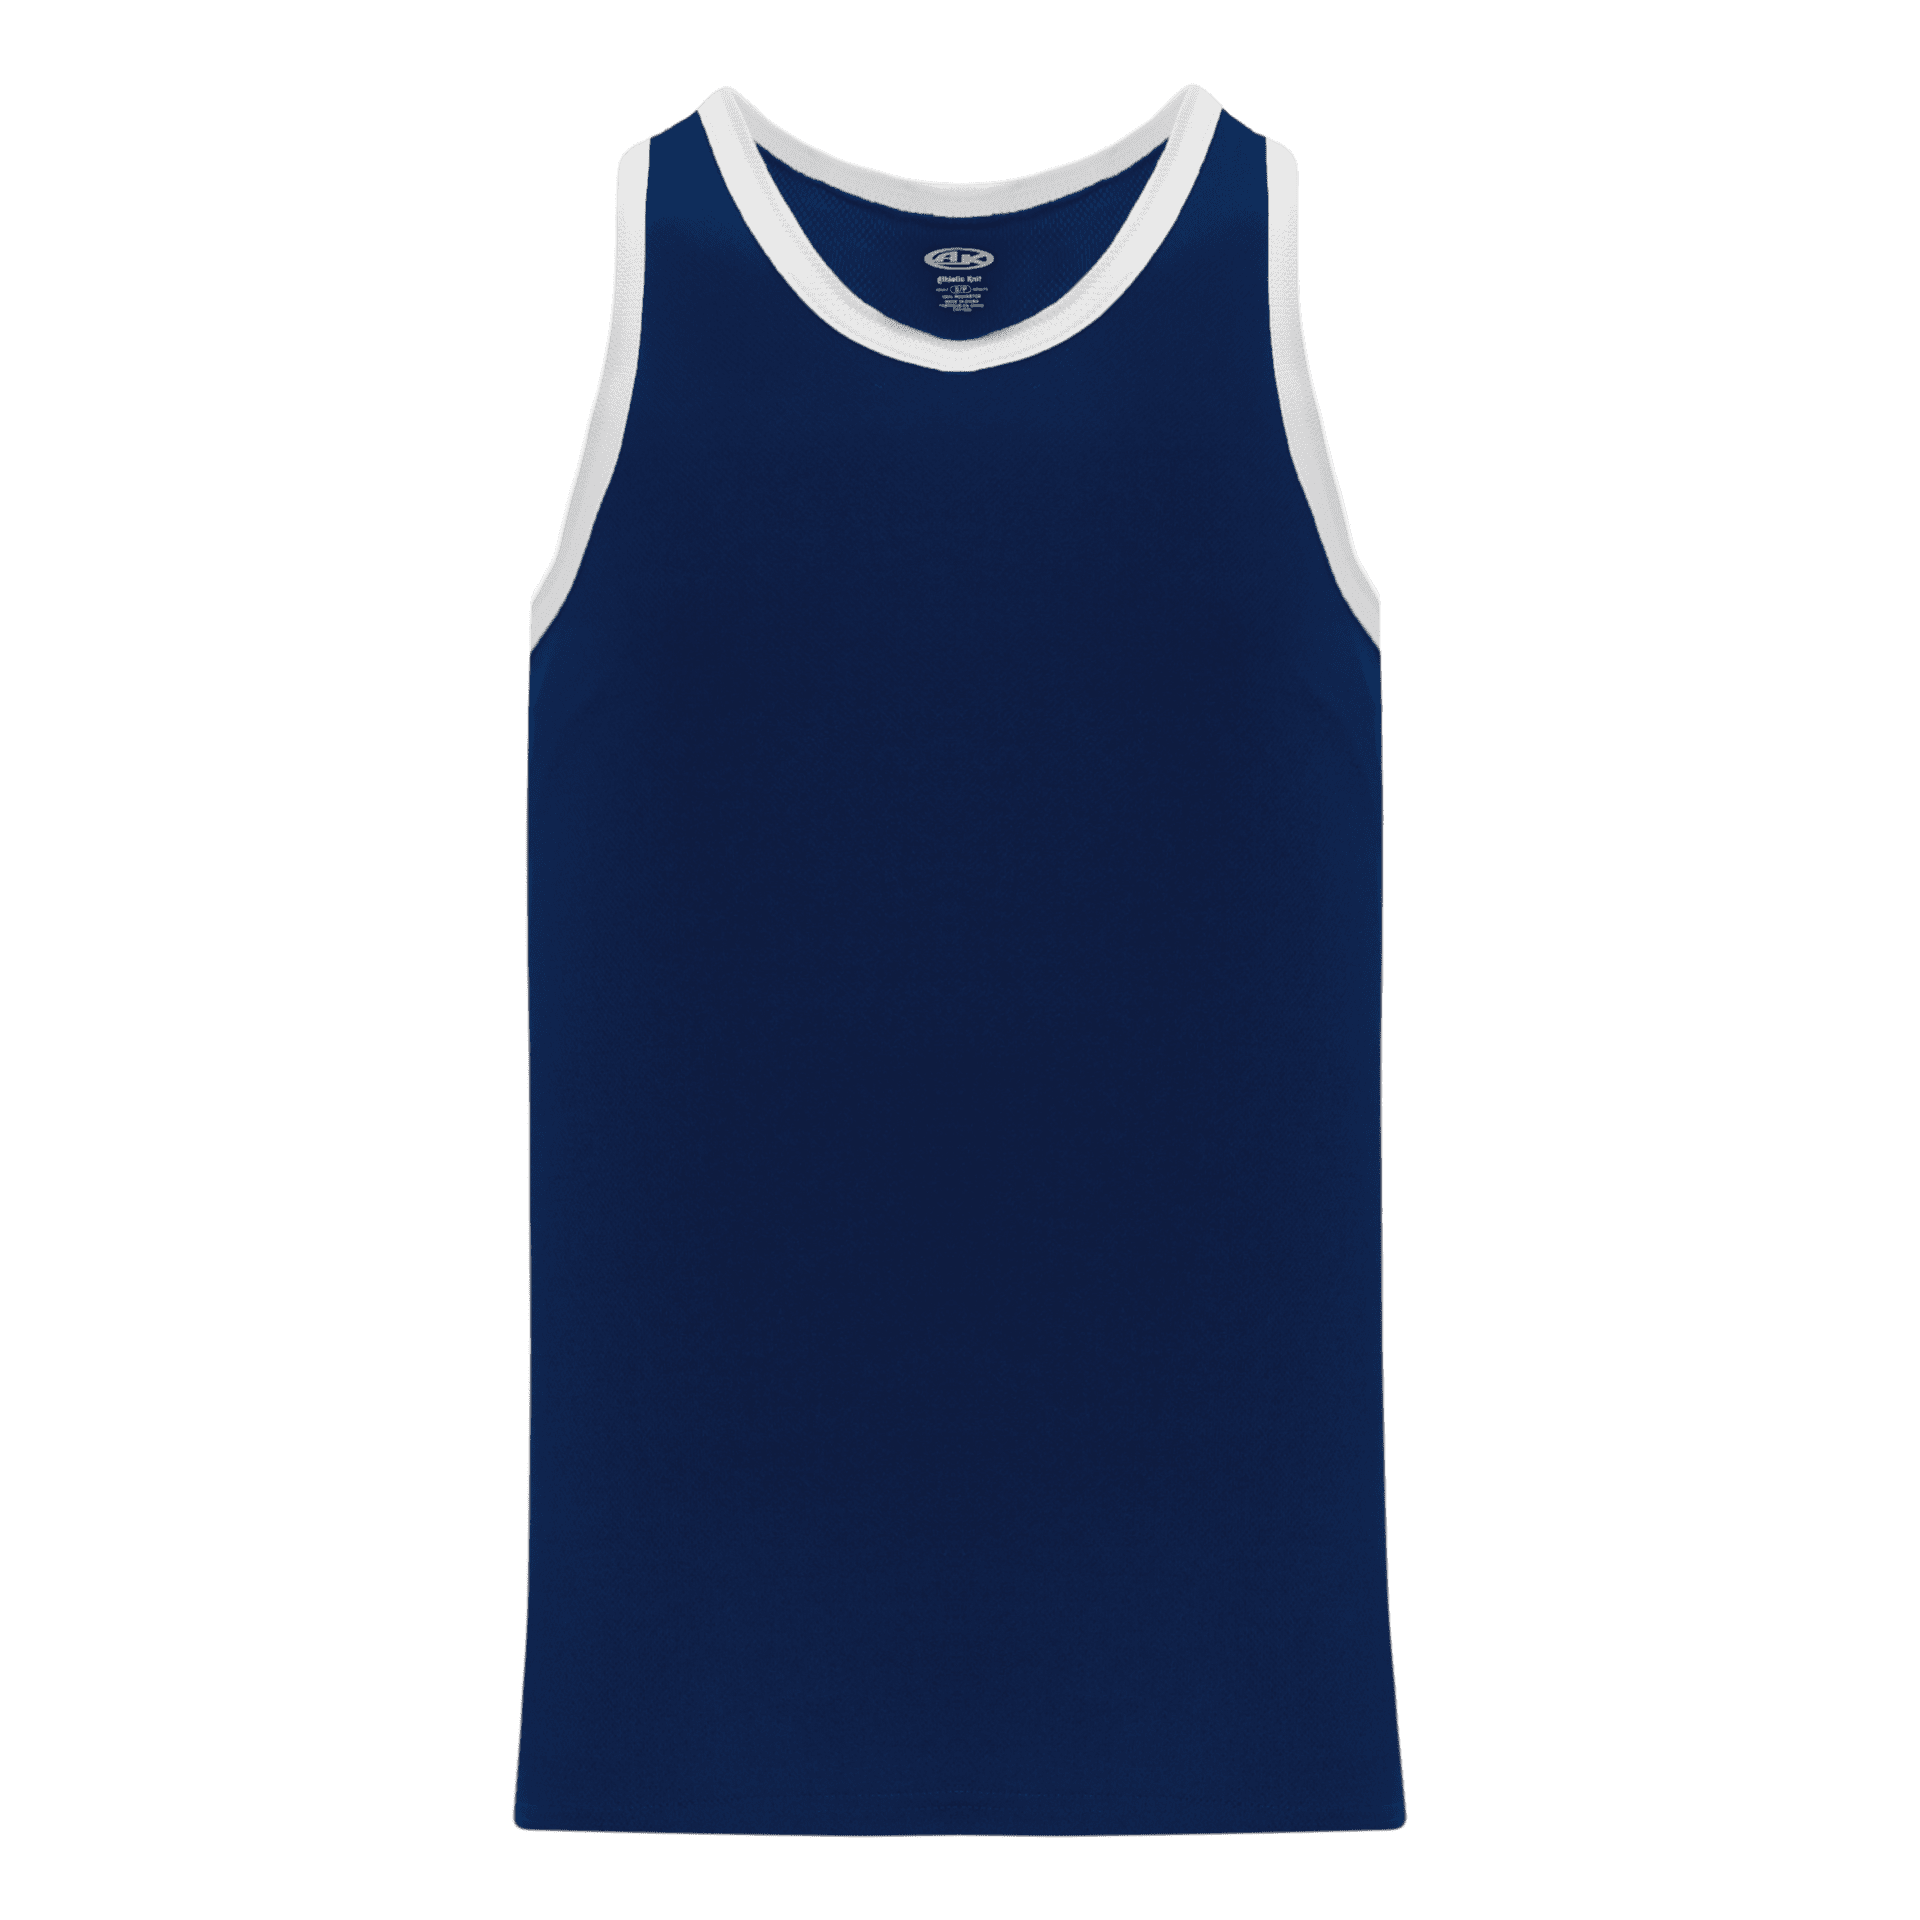 ATHLETIC KNIT LEAGUE BASKETBALL JERSEY #B1325 Navy / White